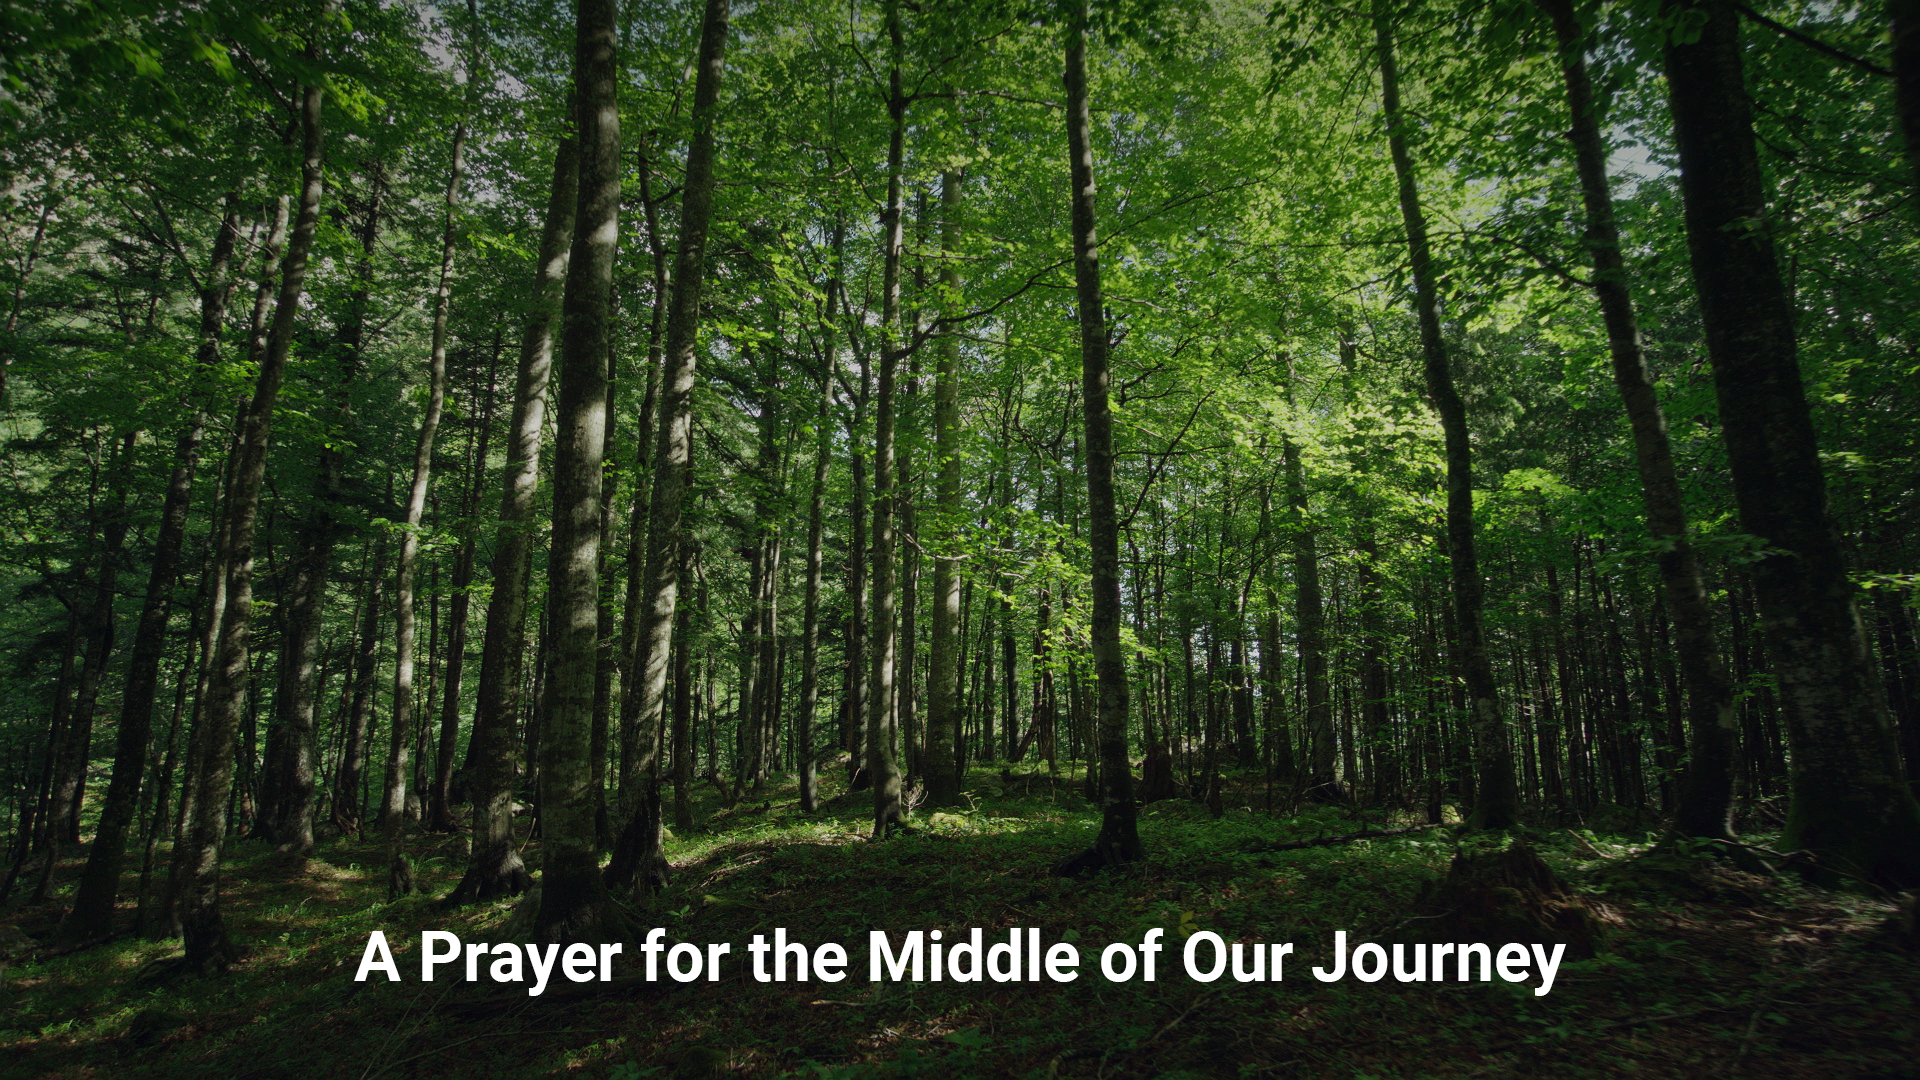 A Prayer for the Middle of our Journey